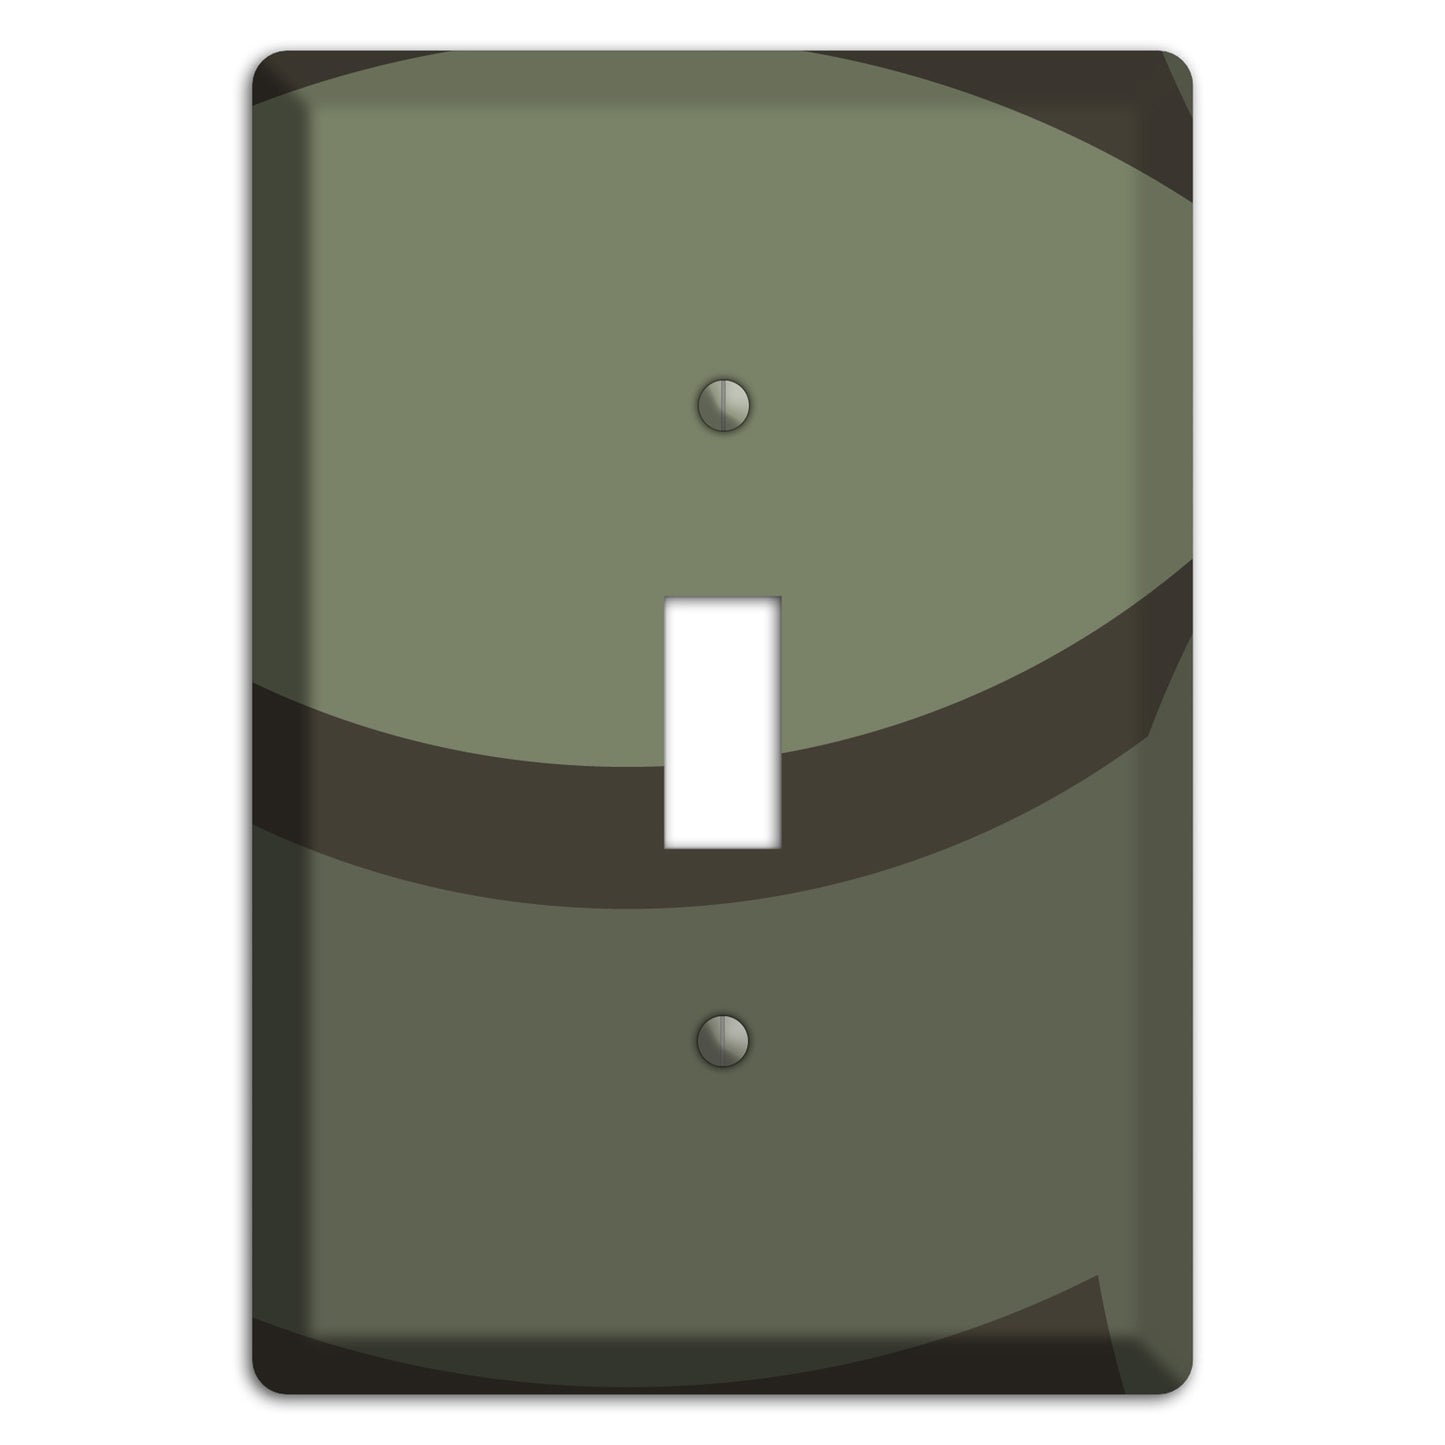 Olive Abstract Cover Plates